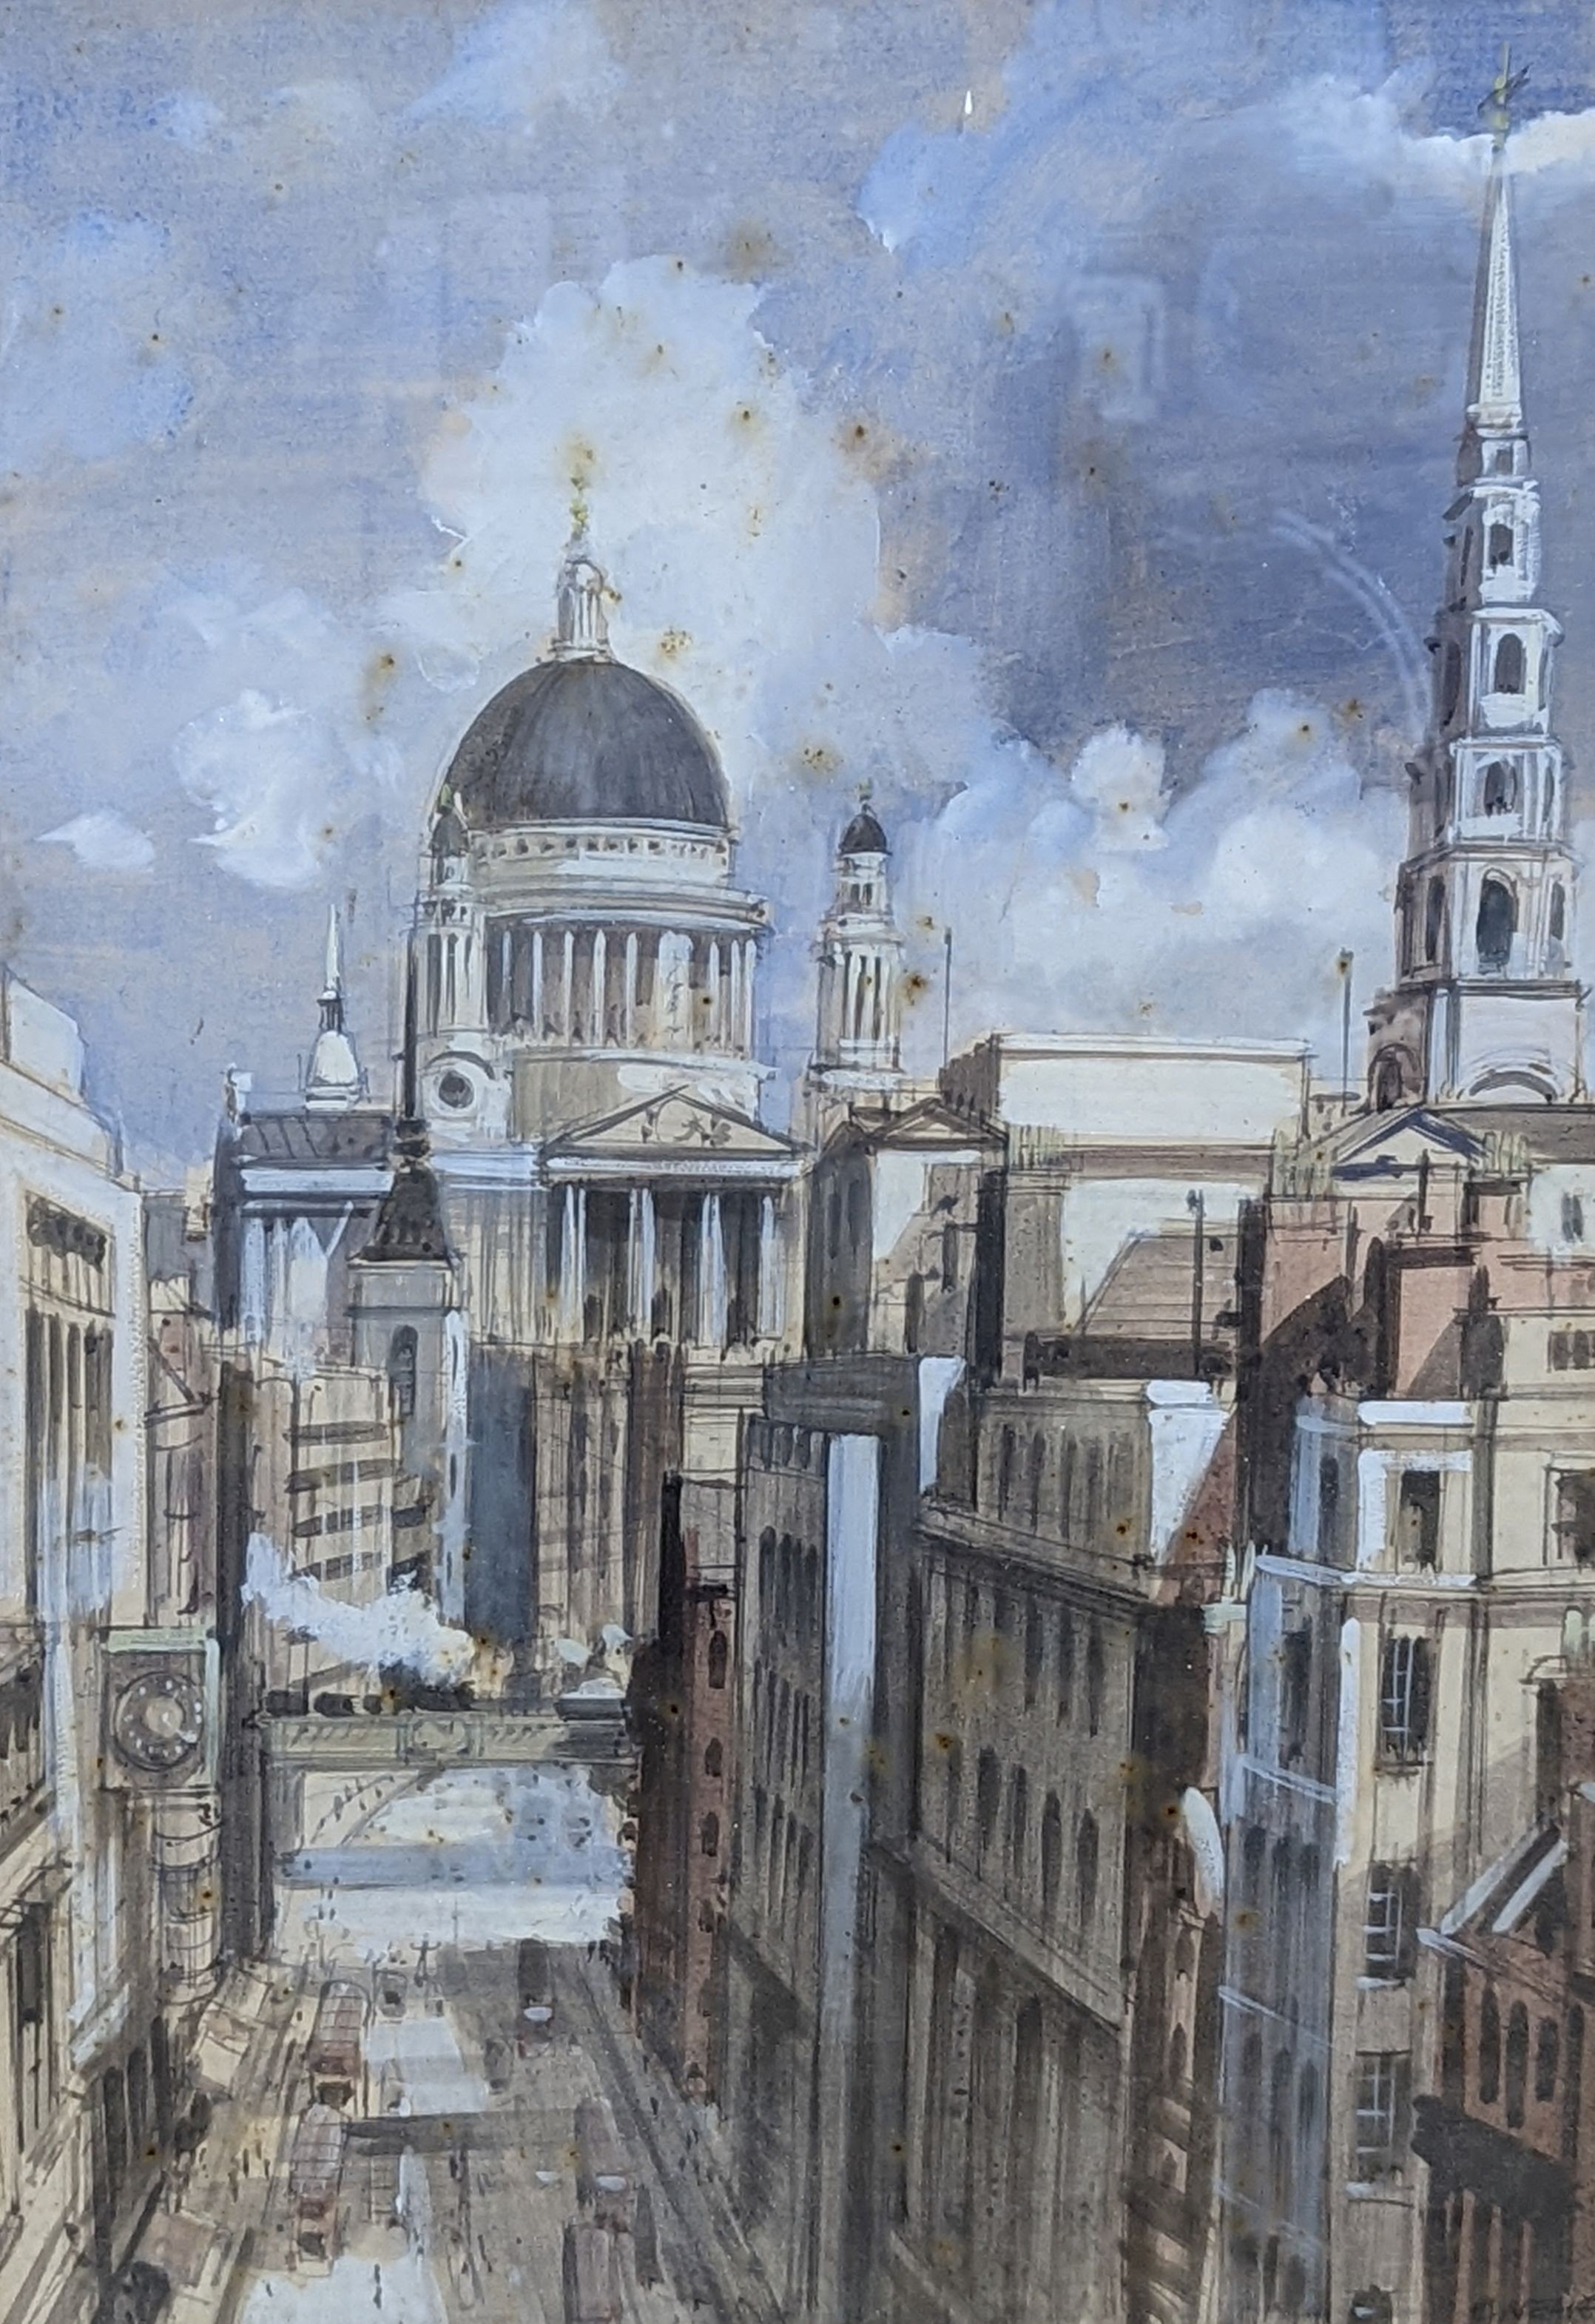 Henry James Neave, two ink and watercolour works, View of St Paul's and Work on Angels, St Paul's Reredos 1958, both signed, 46 x 32cm and 45 x 29cm